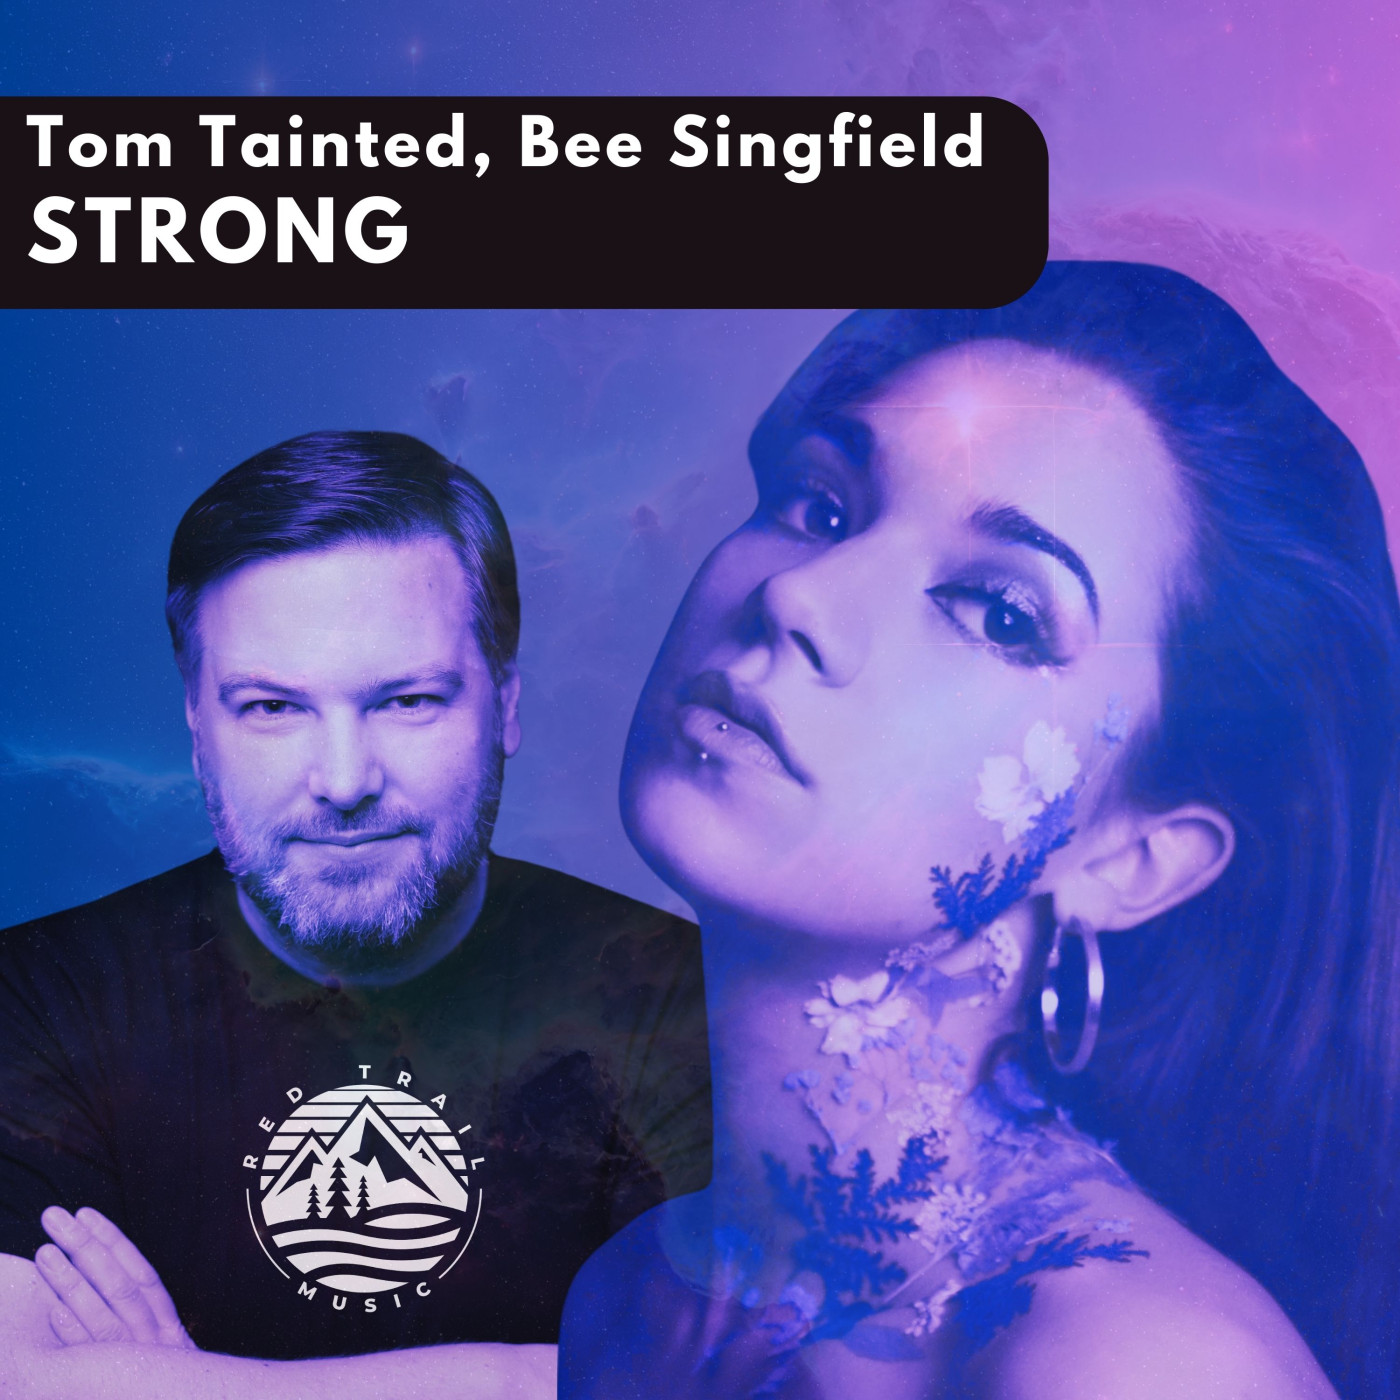 'Strong': the Must-Listen Production From Tom Tainted and Bee Singfield